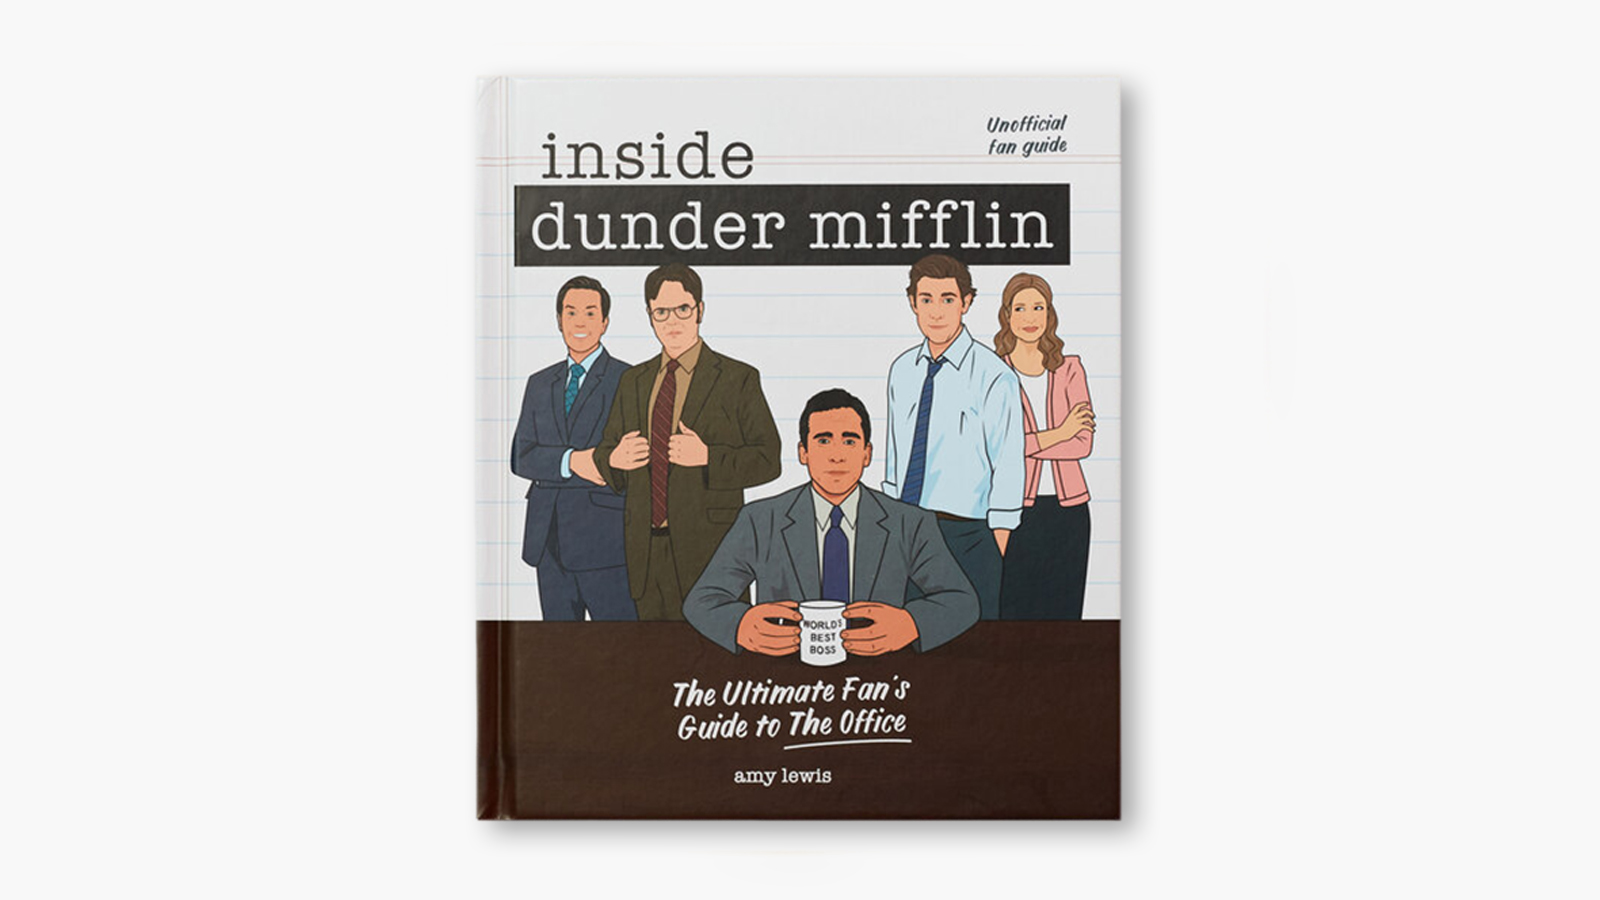 ‘Inside Dunder Mifflin’ by Amy Lewis